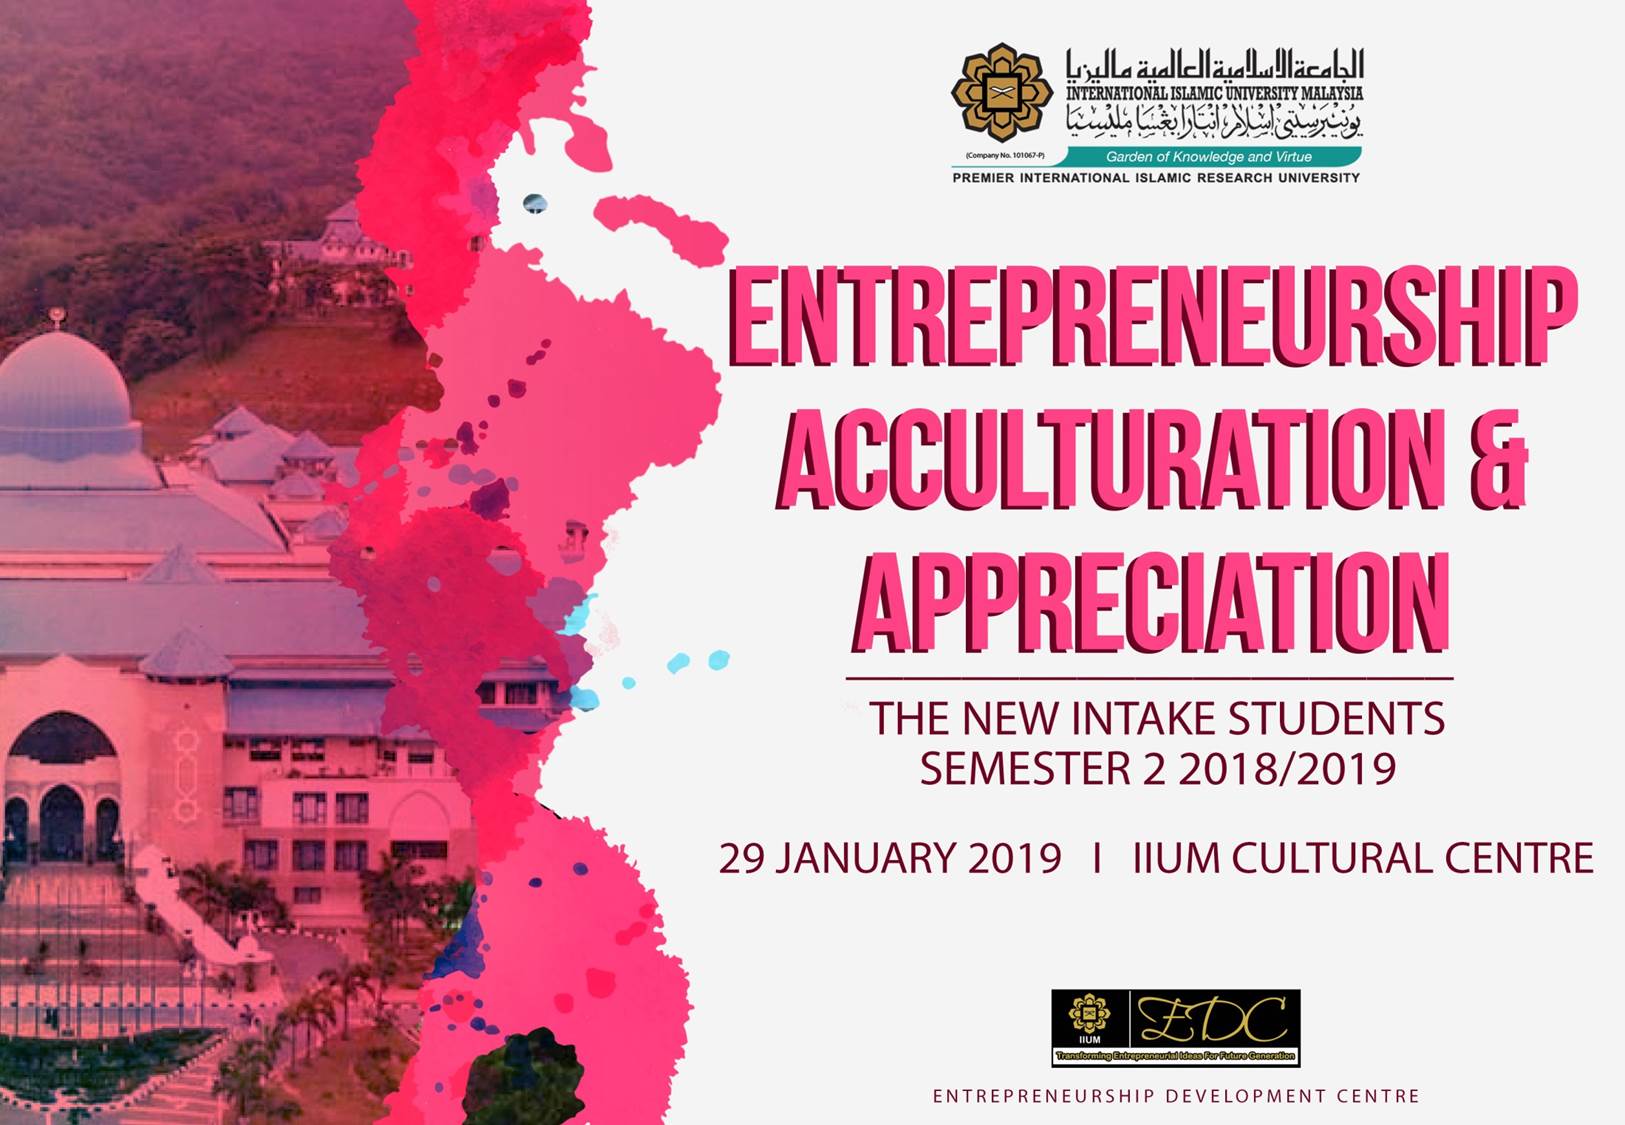 Entrepreneurship Acculturation and Appreciation -IIUM Gombak Campus ( For New Students, Semester 2, 2018/2019)